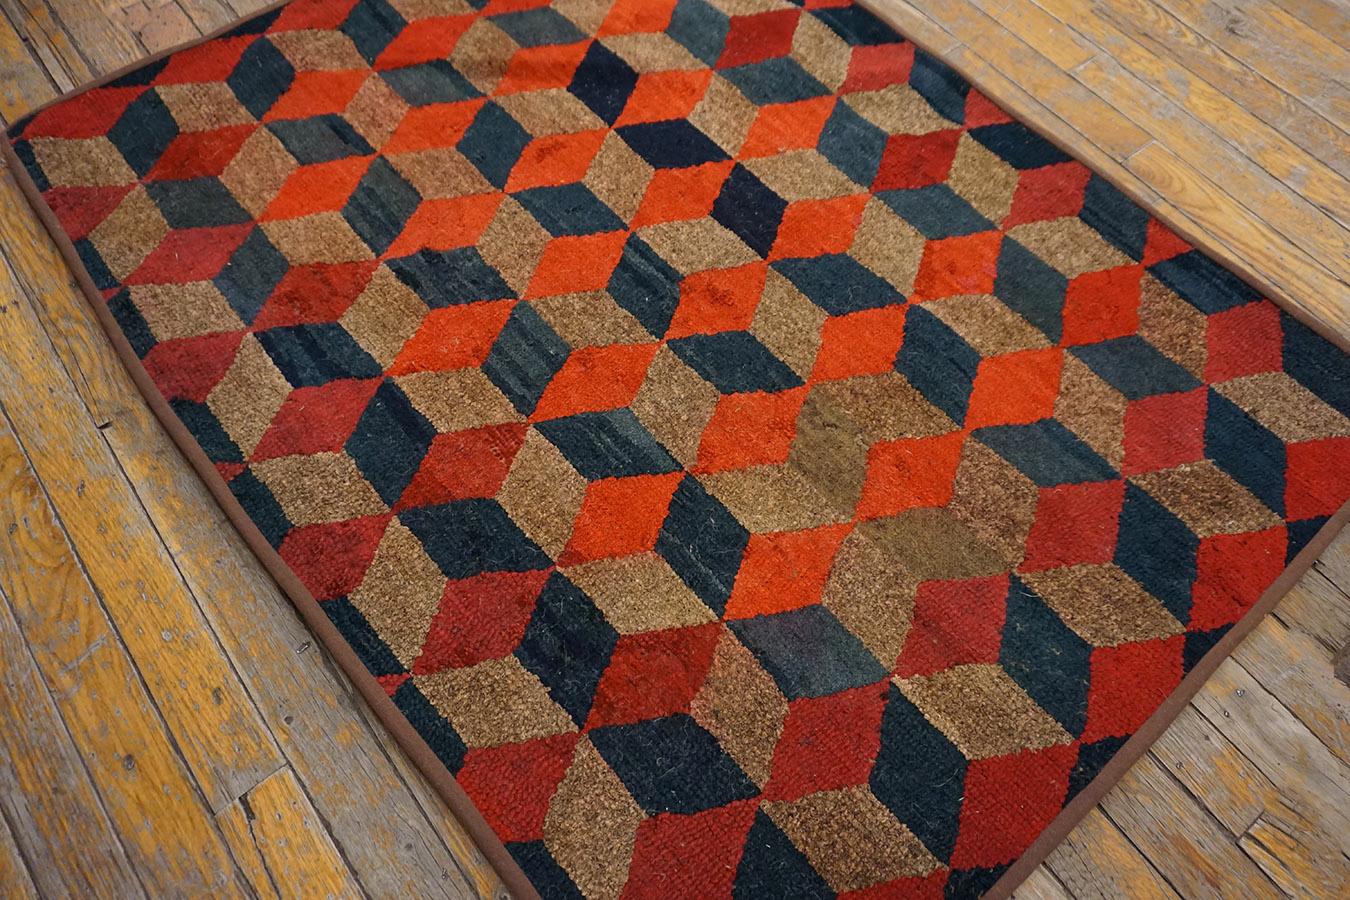 Early 20th Century American Hooked Rug with Tumbling Block Pattern
2'10